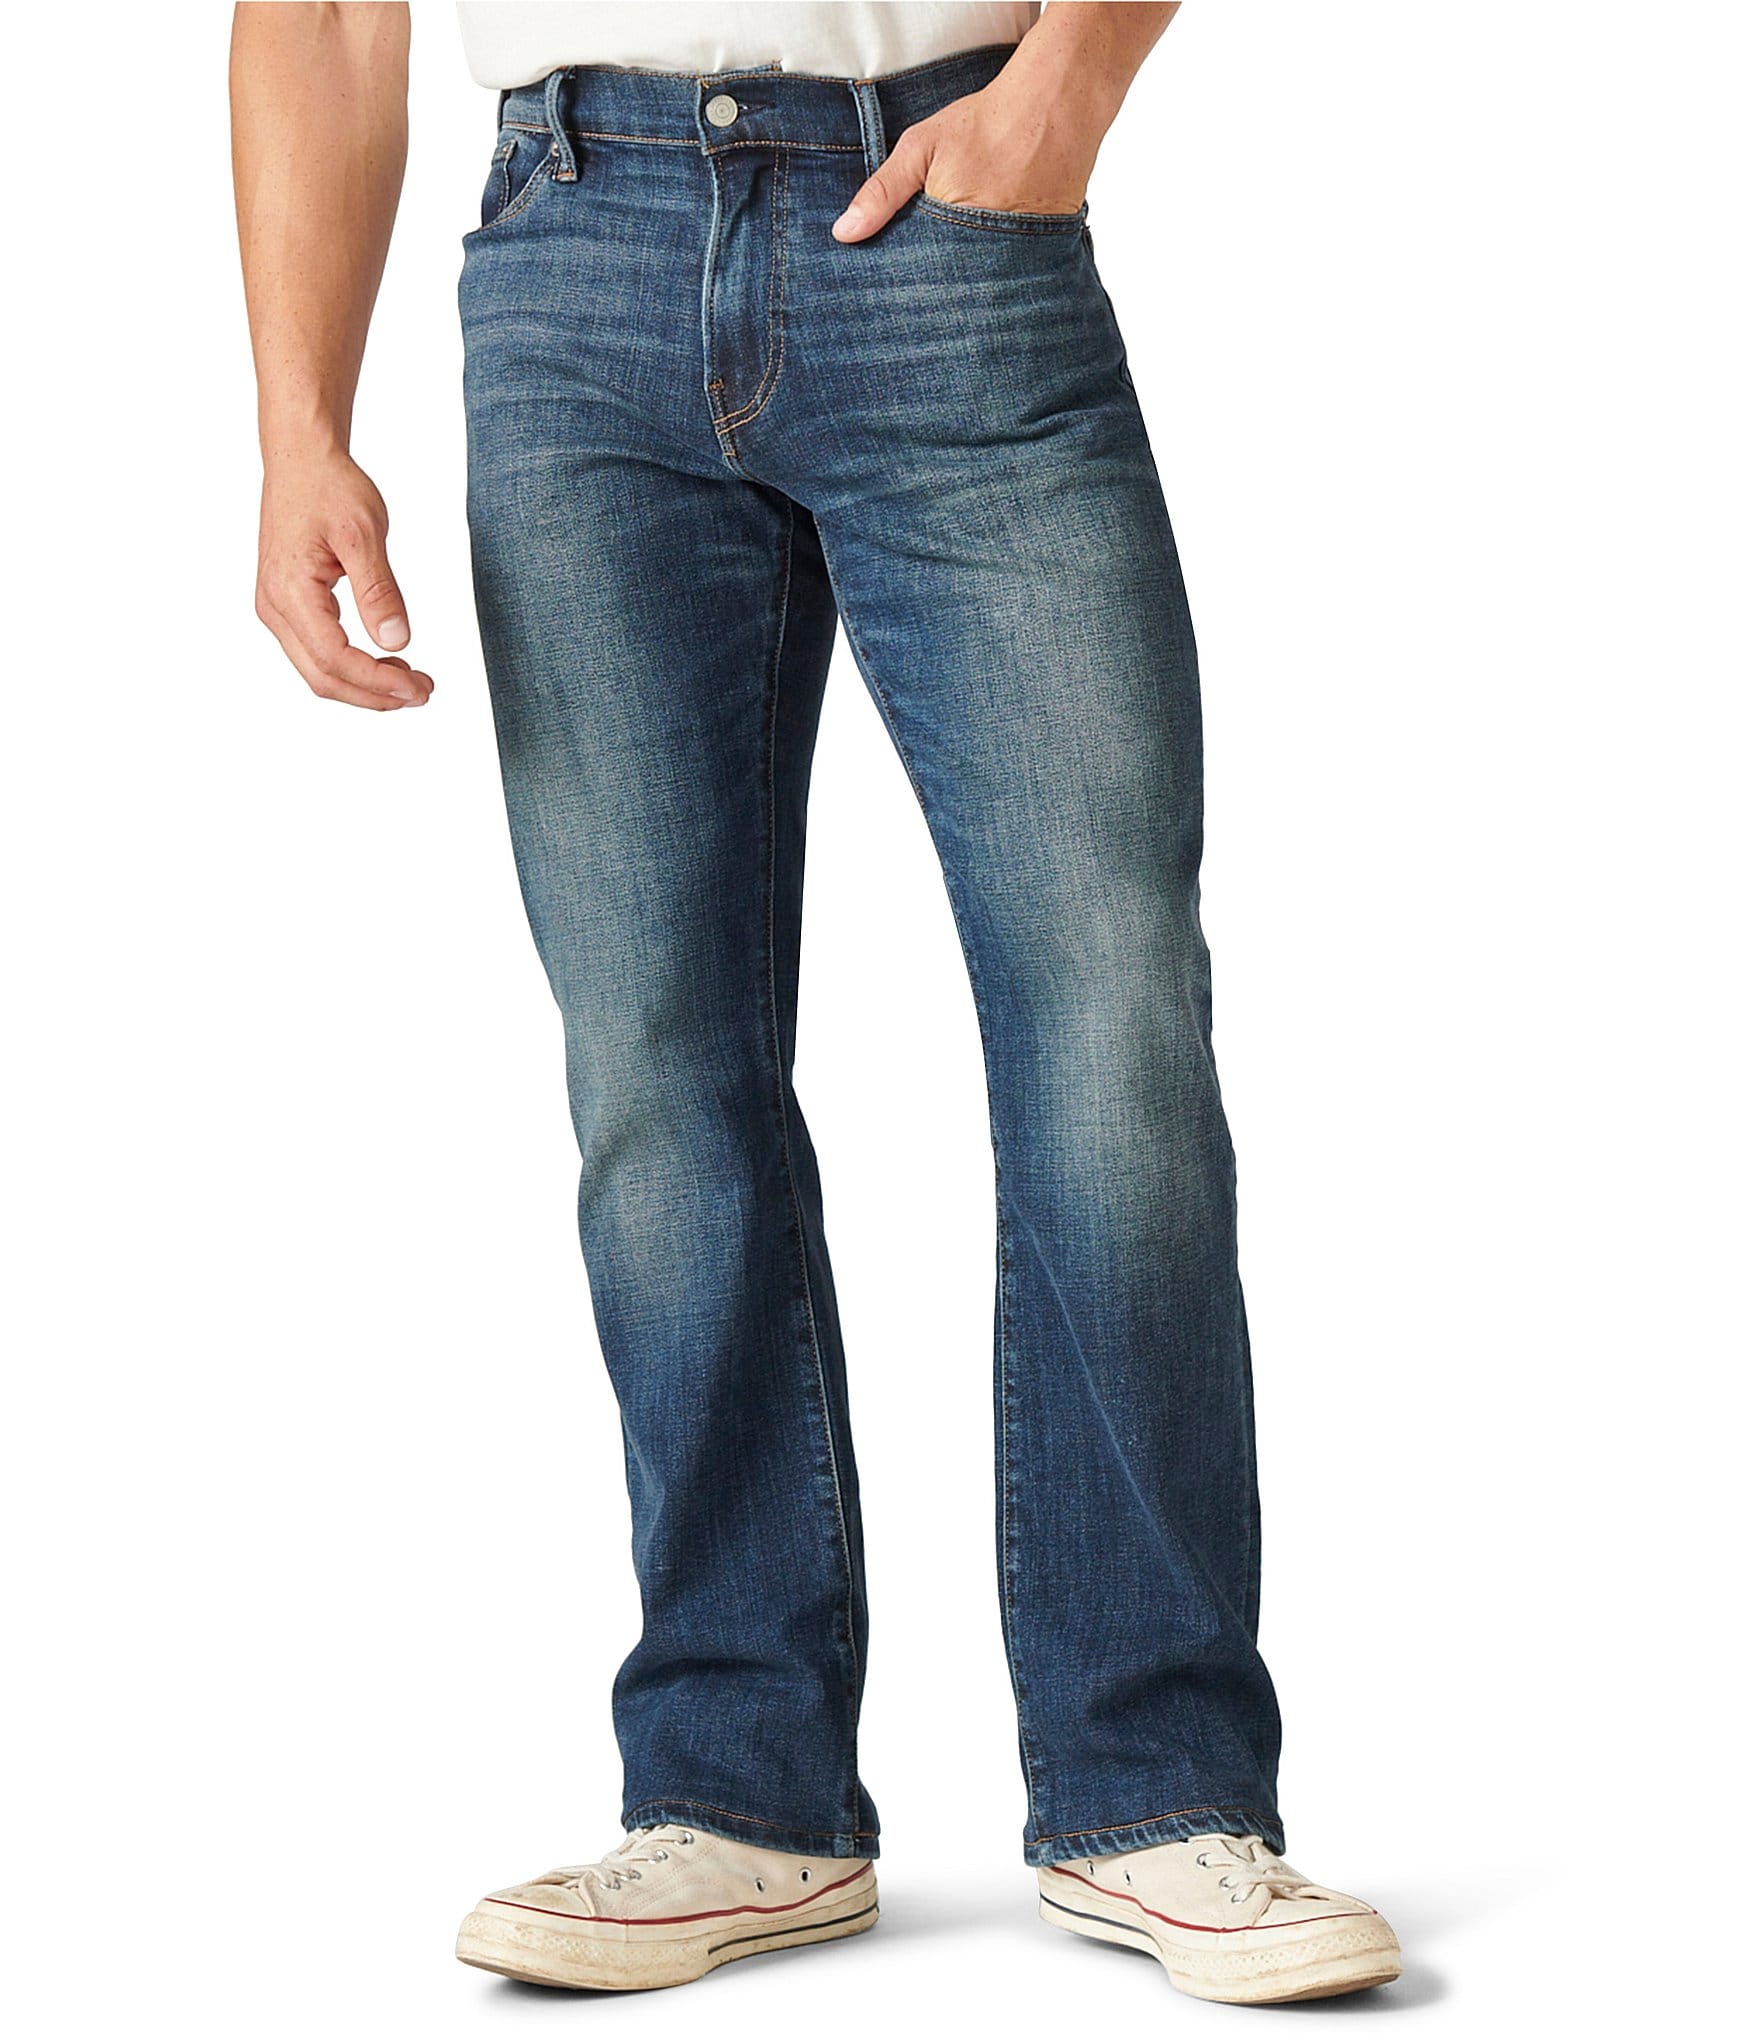 Levi's - The Levi's® COOLMAX® Jeans are constructed with COOLMAX